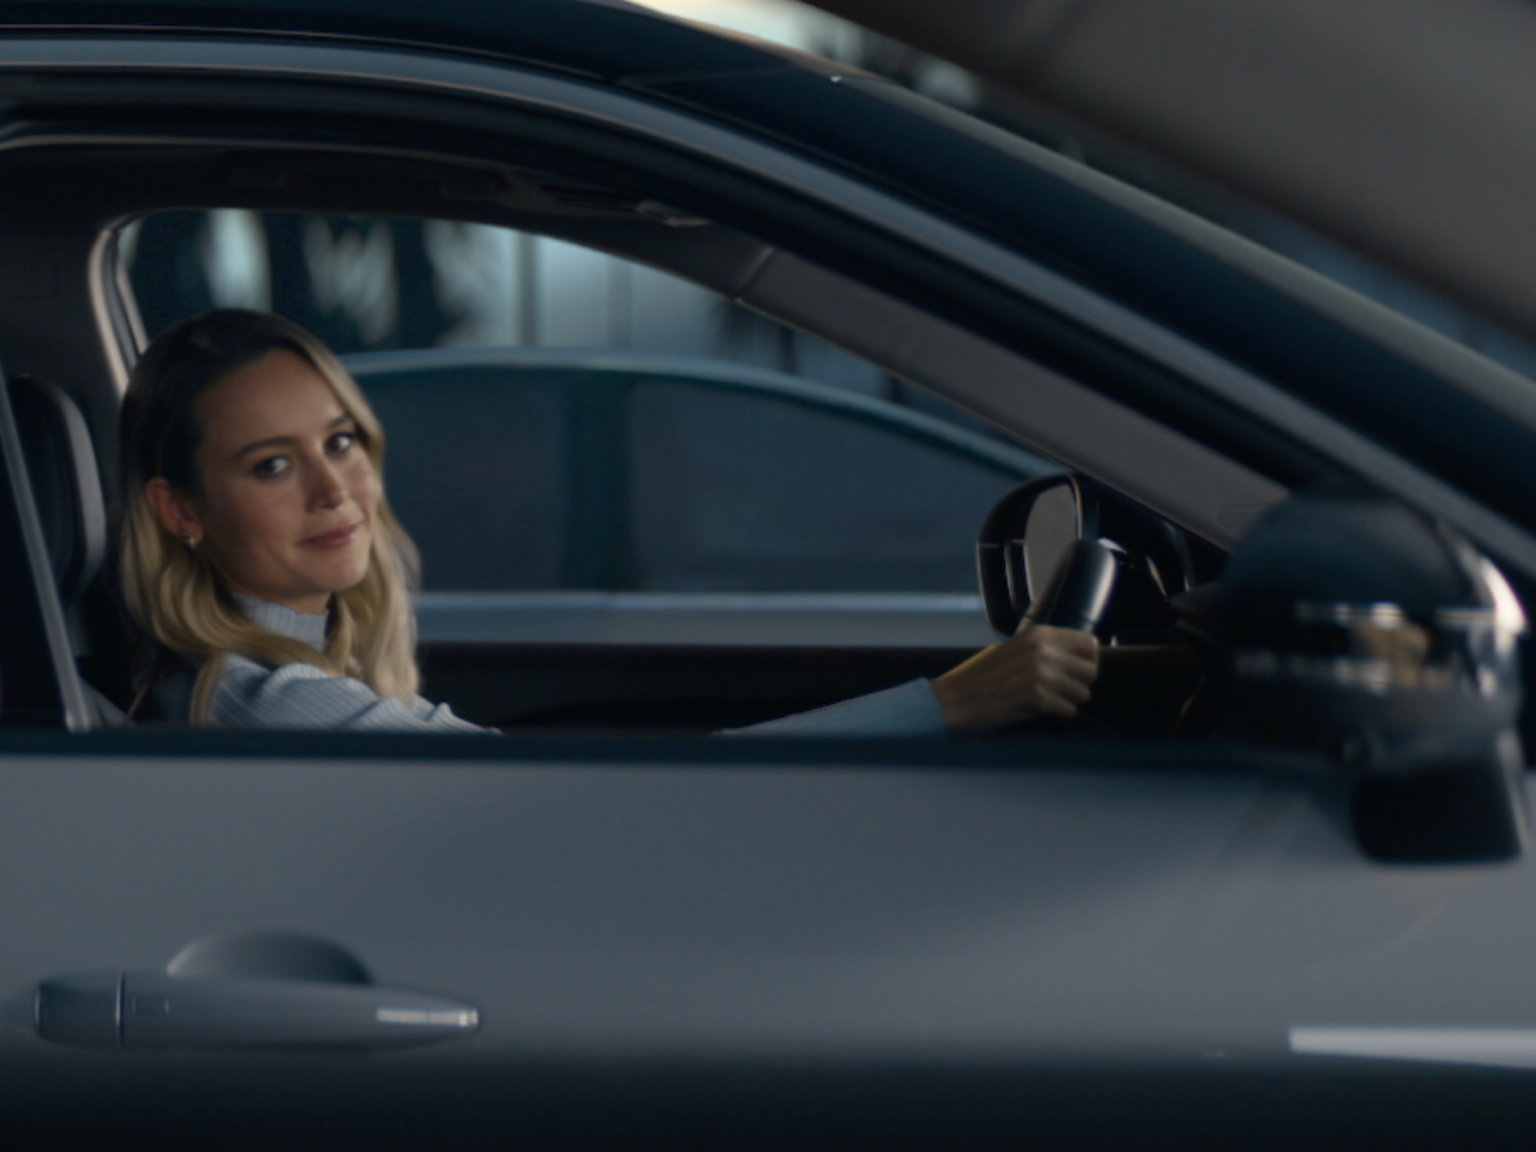 A new commercial starring Brie Larson and the 2021 Nissan Rogue launches this month.